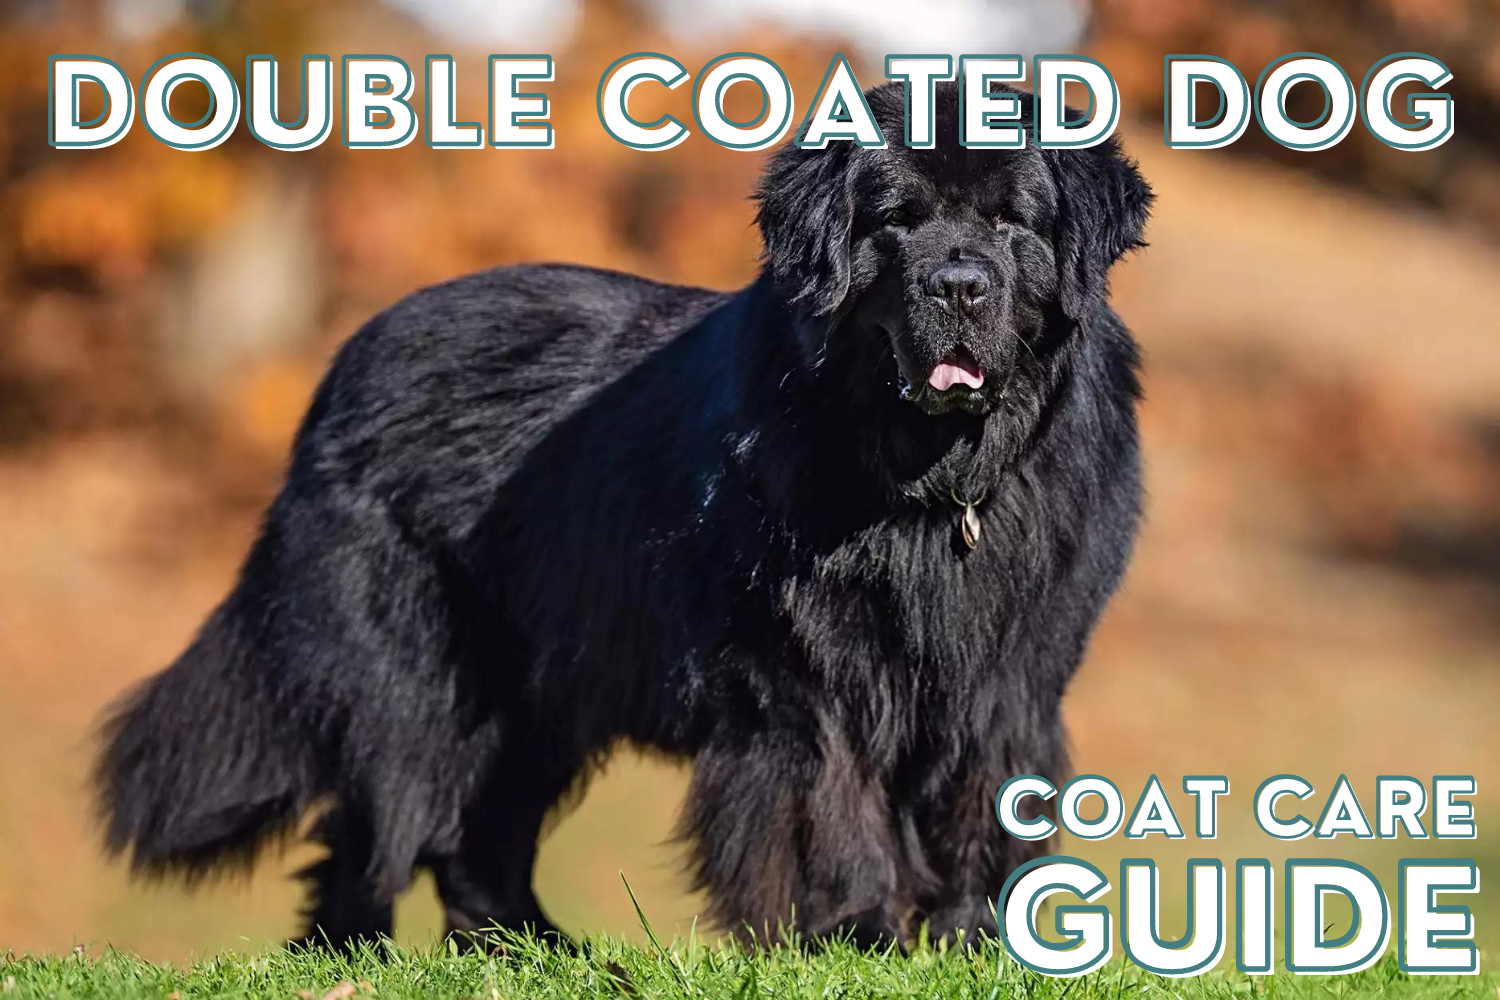 Coat Care Guide for Double Coated Dogs | WildWash Organic London